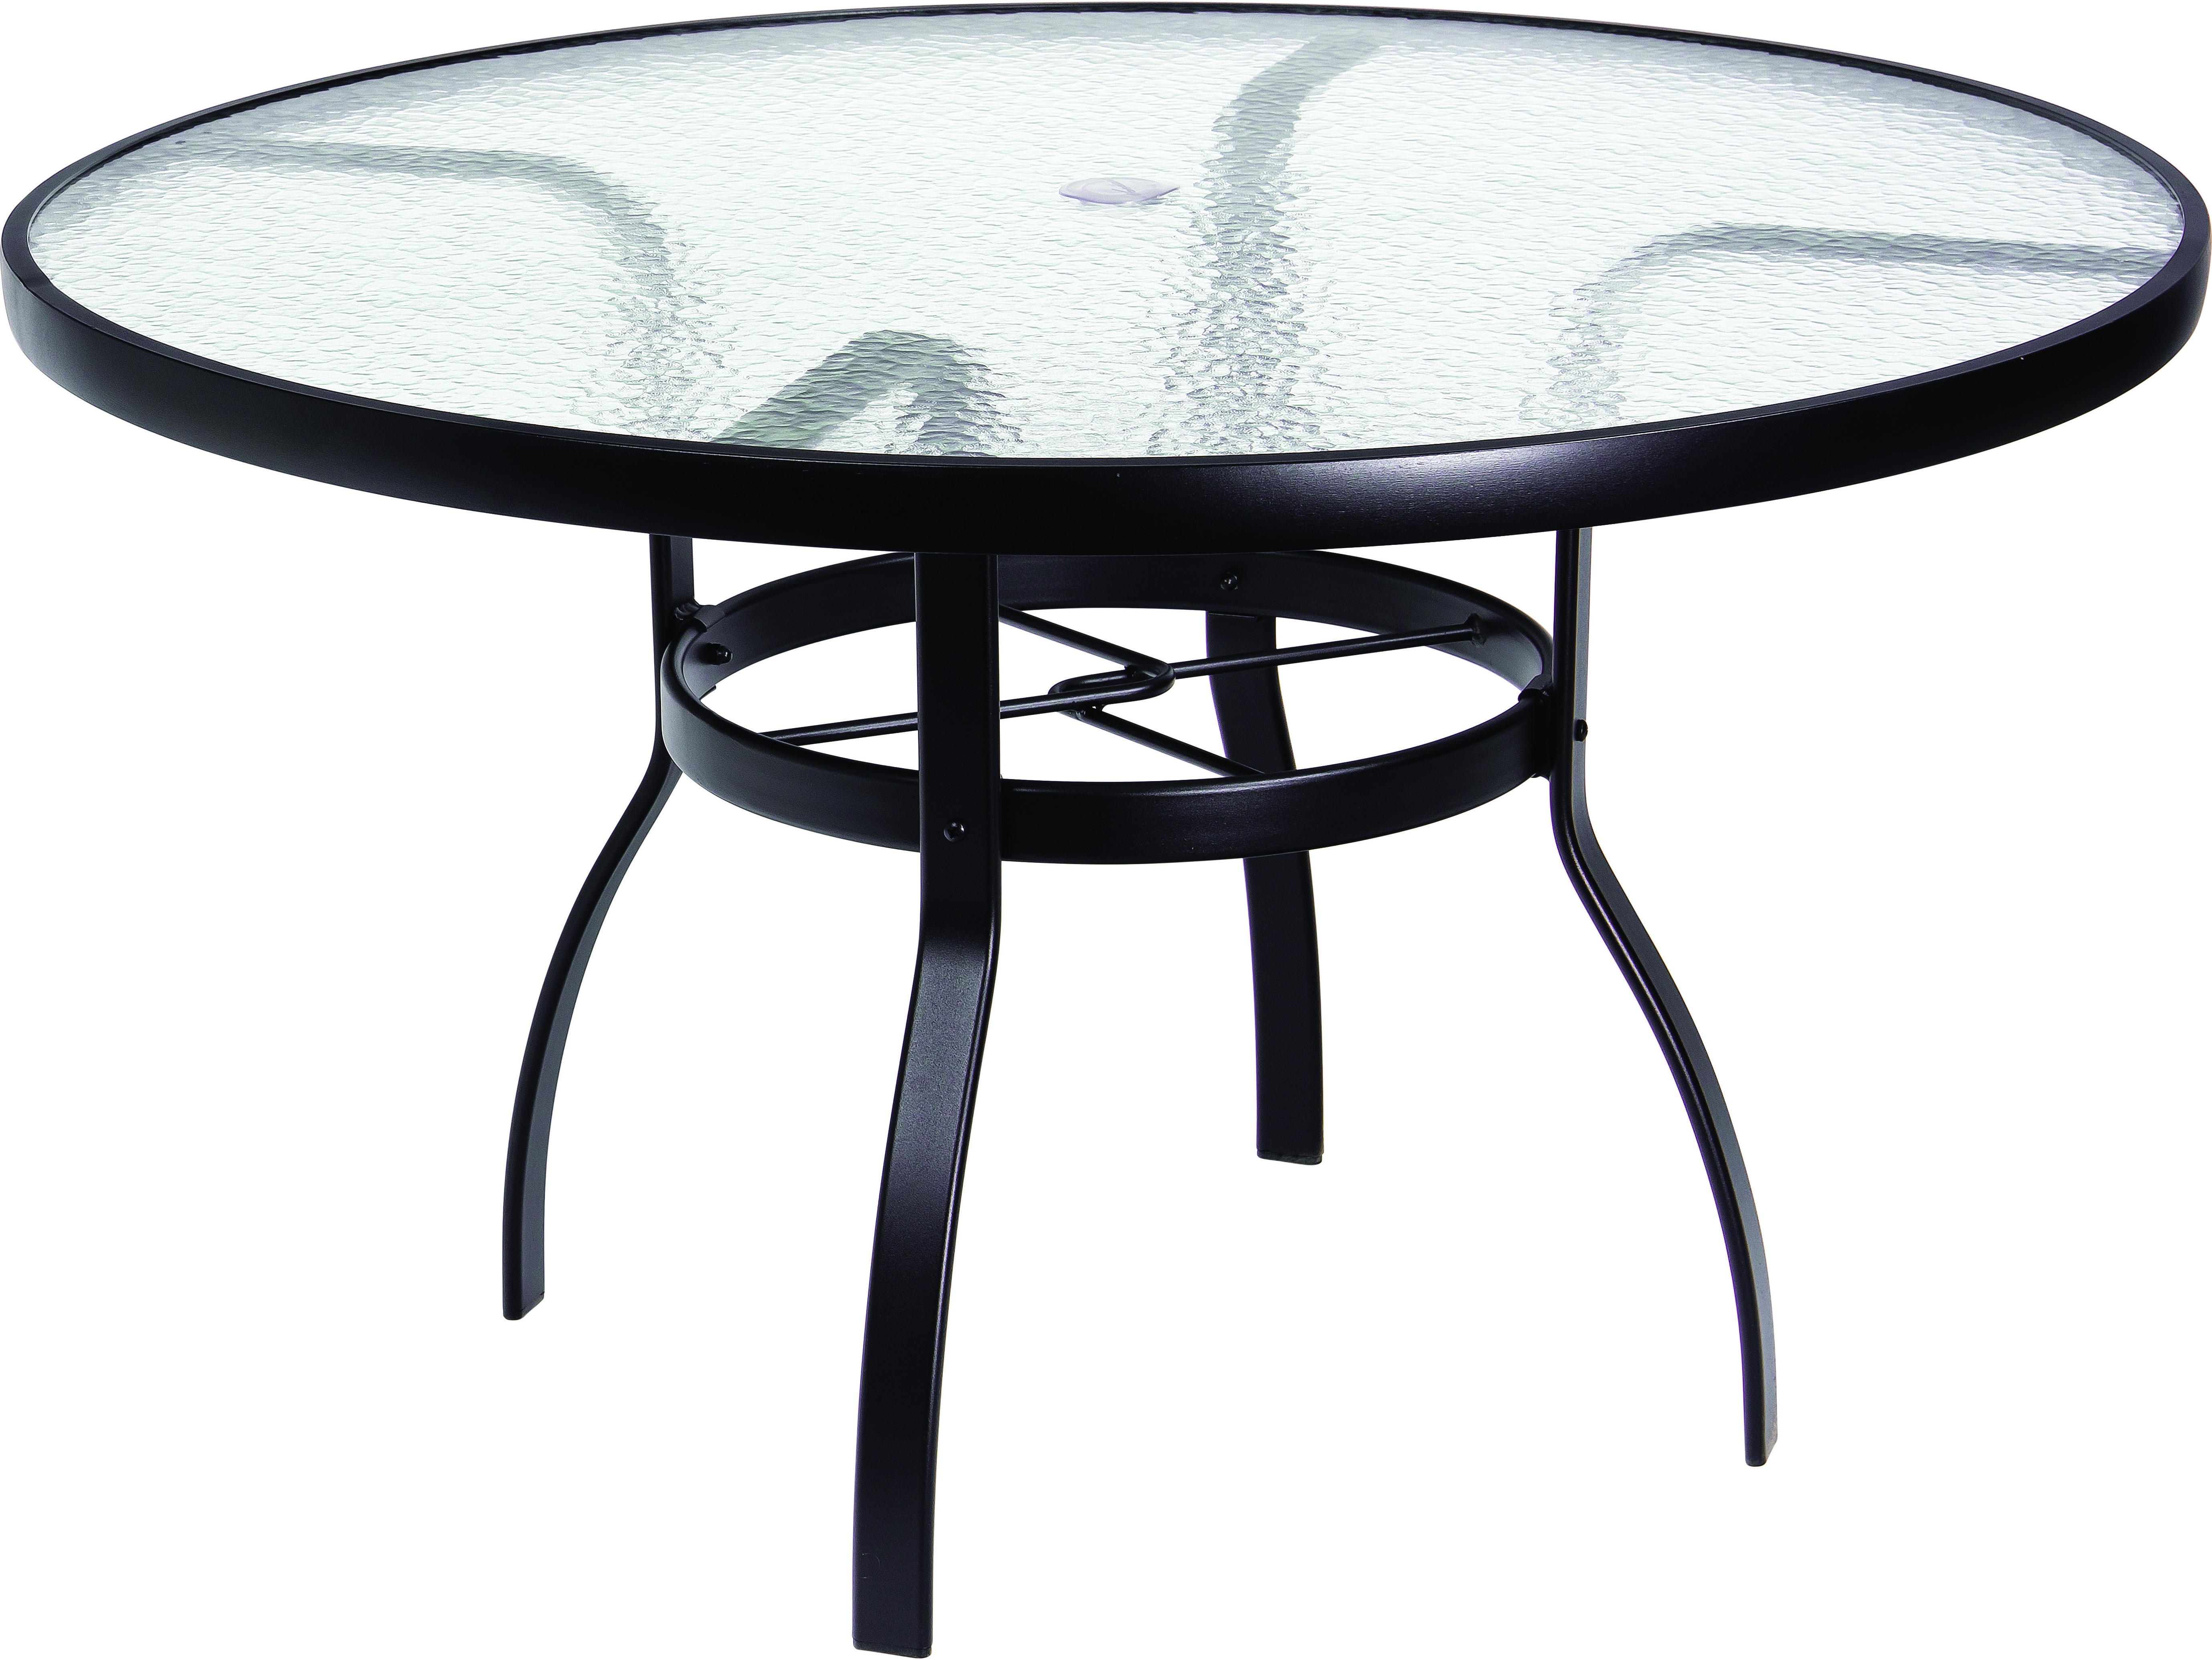 Round Acrylic Top Dining Table, Round Plexiglass Table Topper